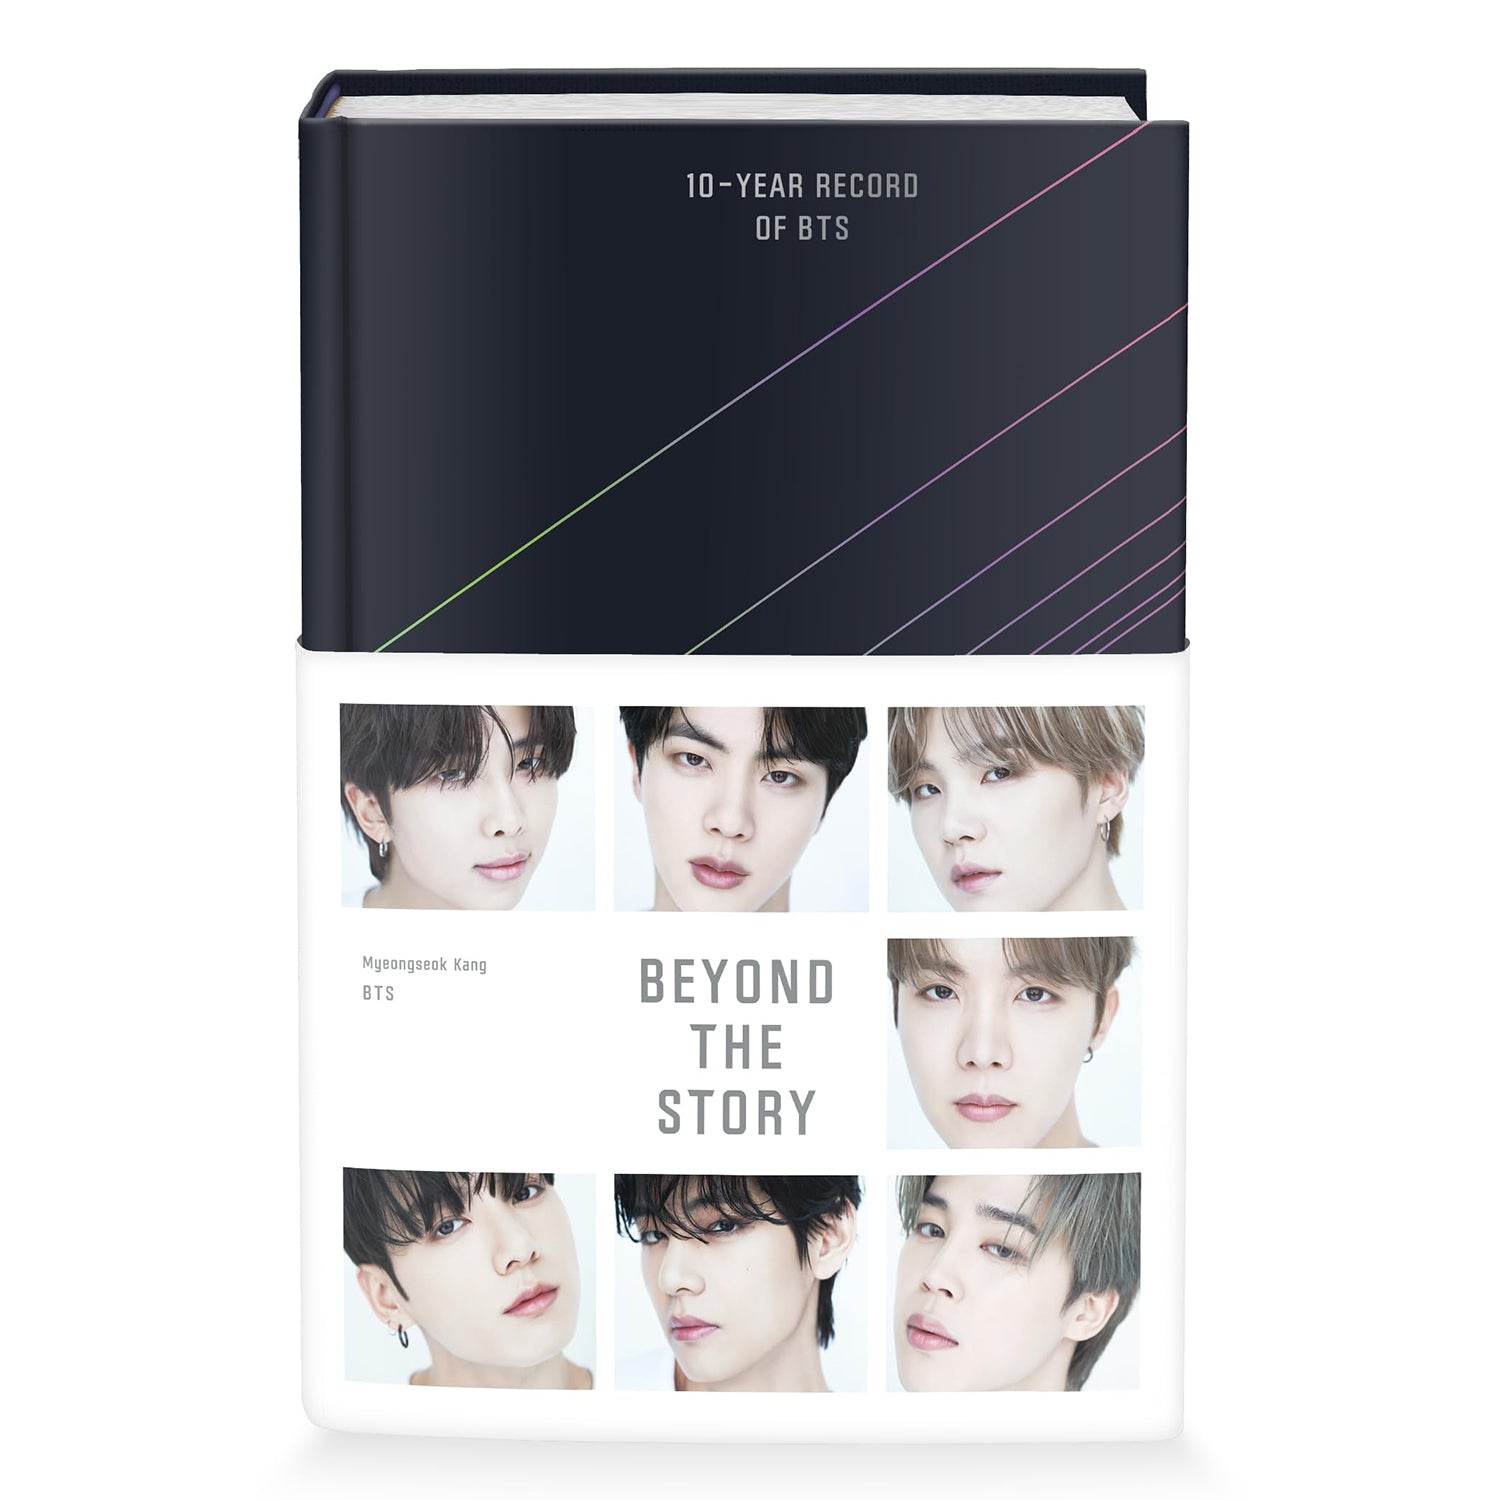 BTS BOOK 'BEYOND THE STORY: 10 YEAR RECORD OF BTS' COVER